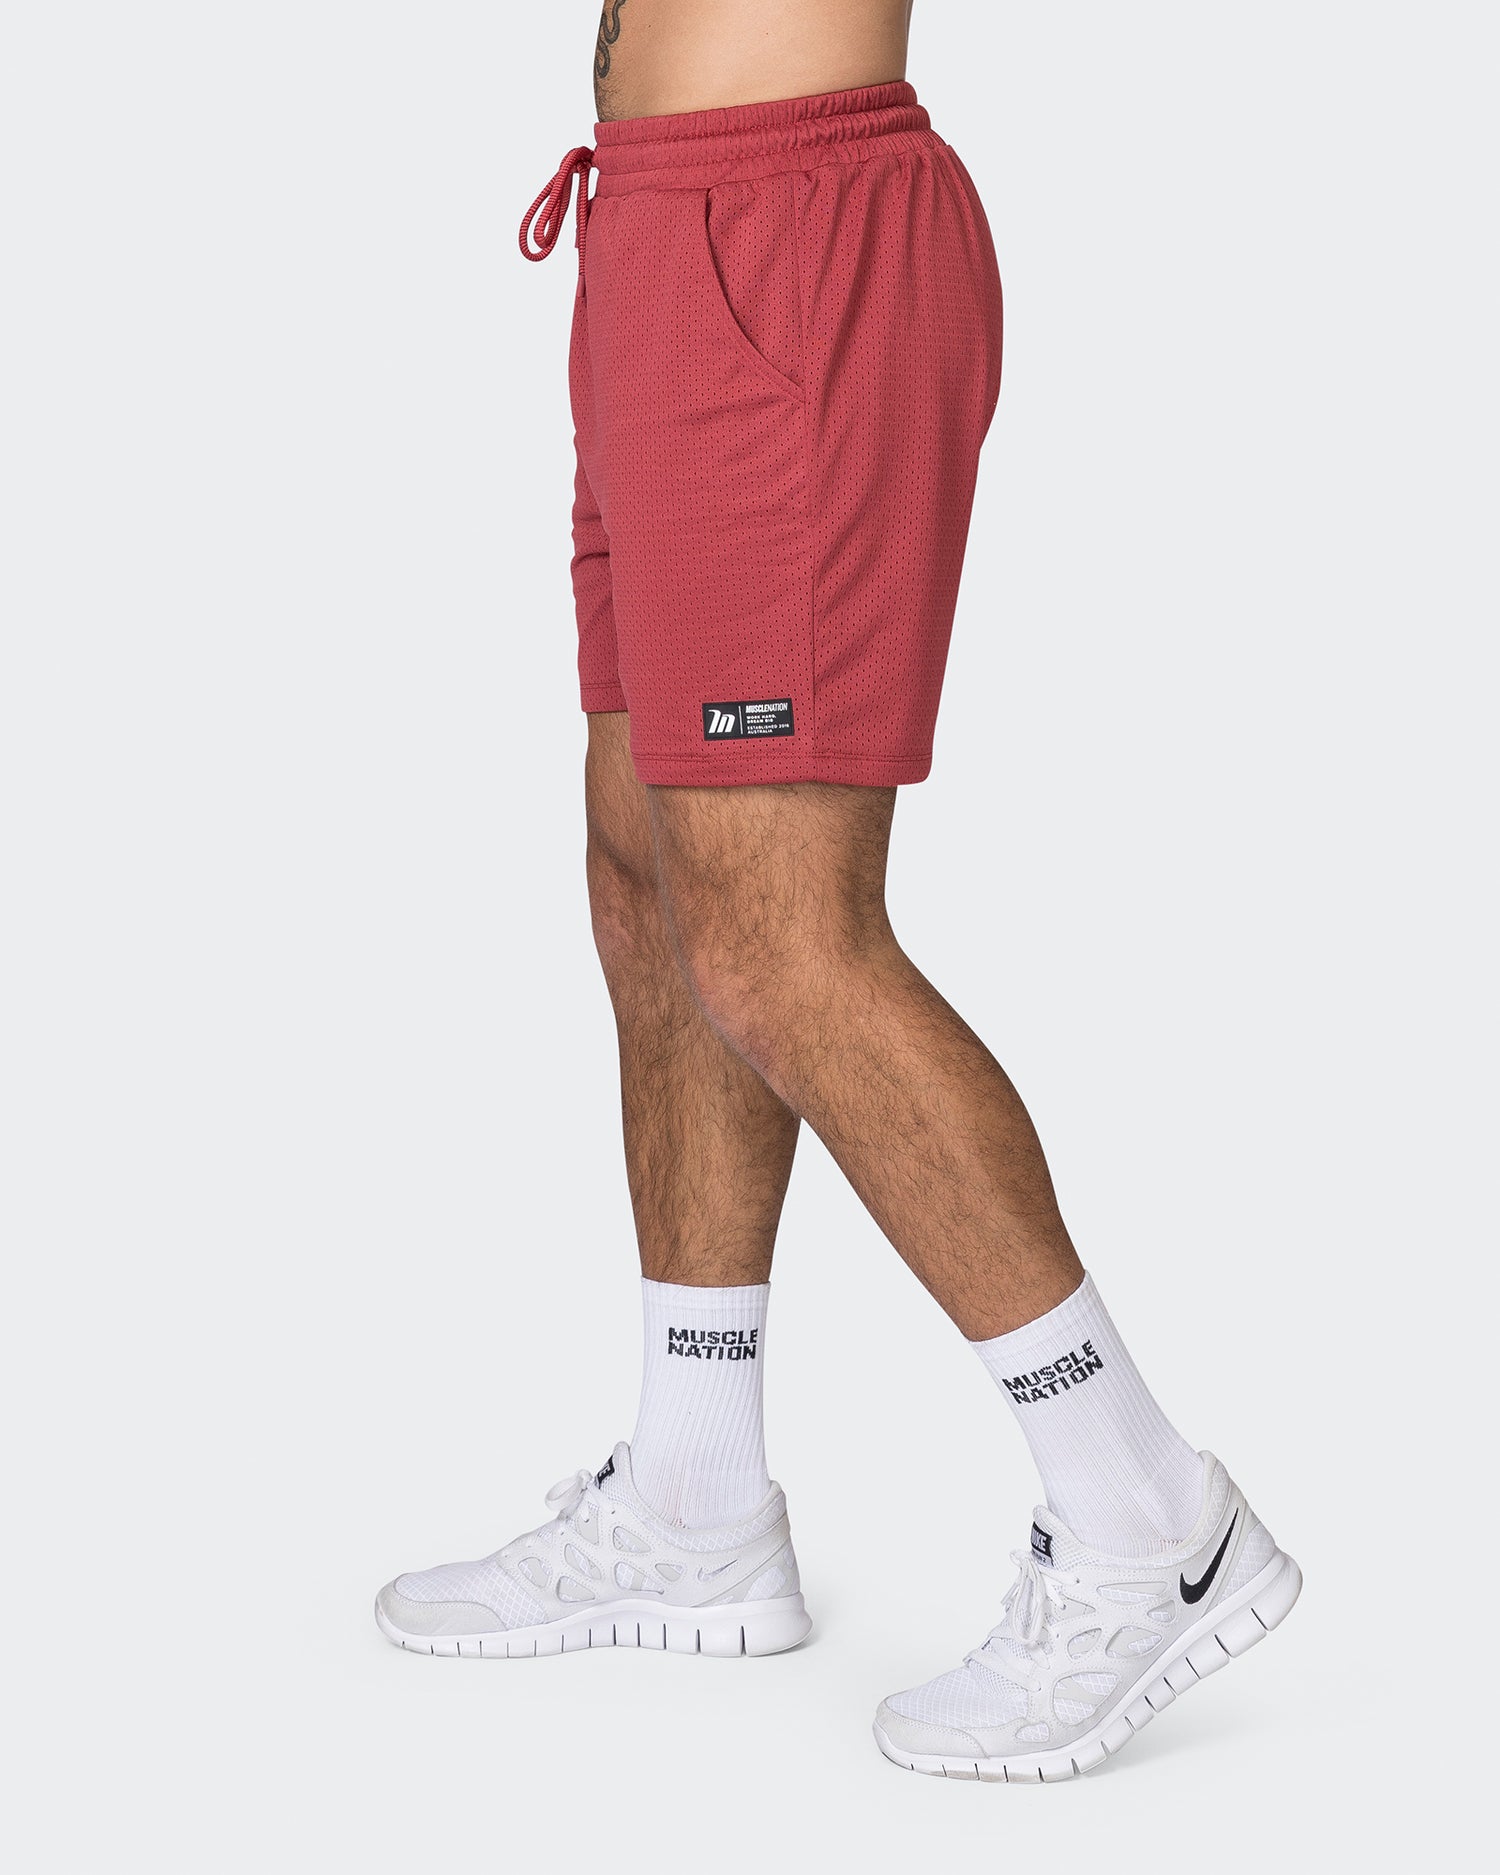 Lay Up 5" Shorts - Dusty Red